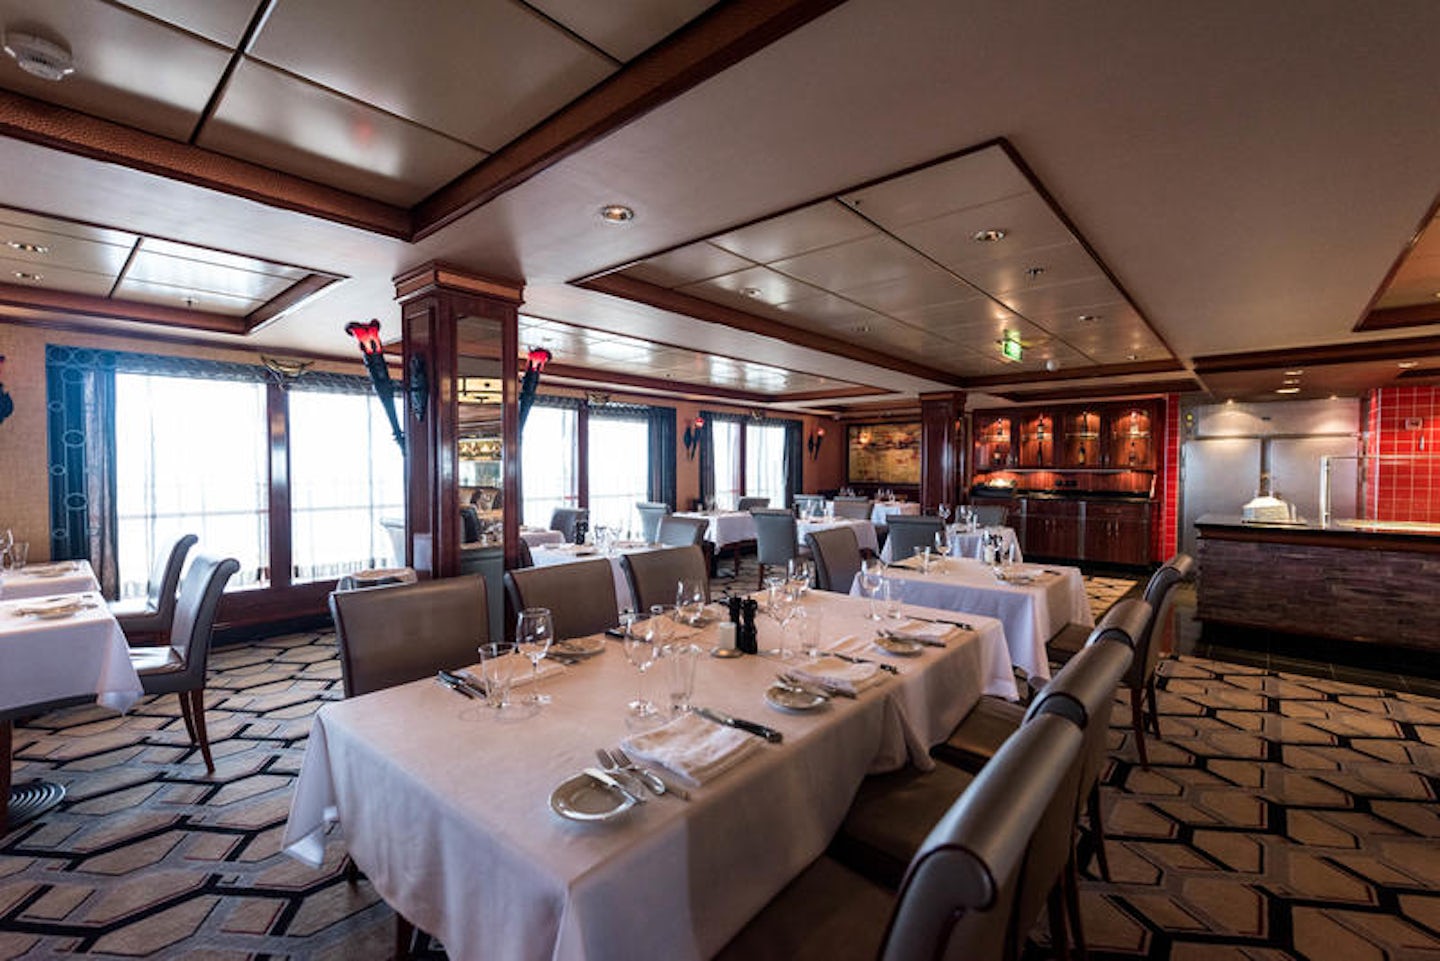 Cagney's Steakhouse on Norwegian Pearl